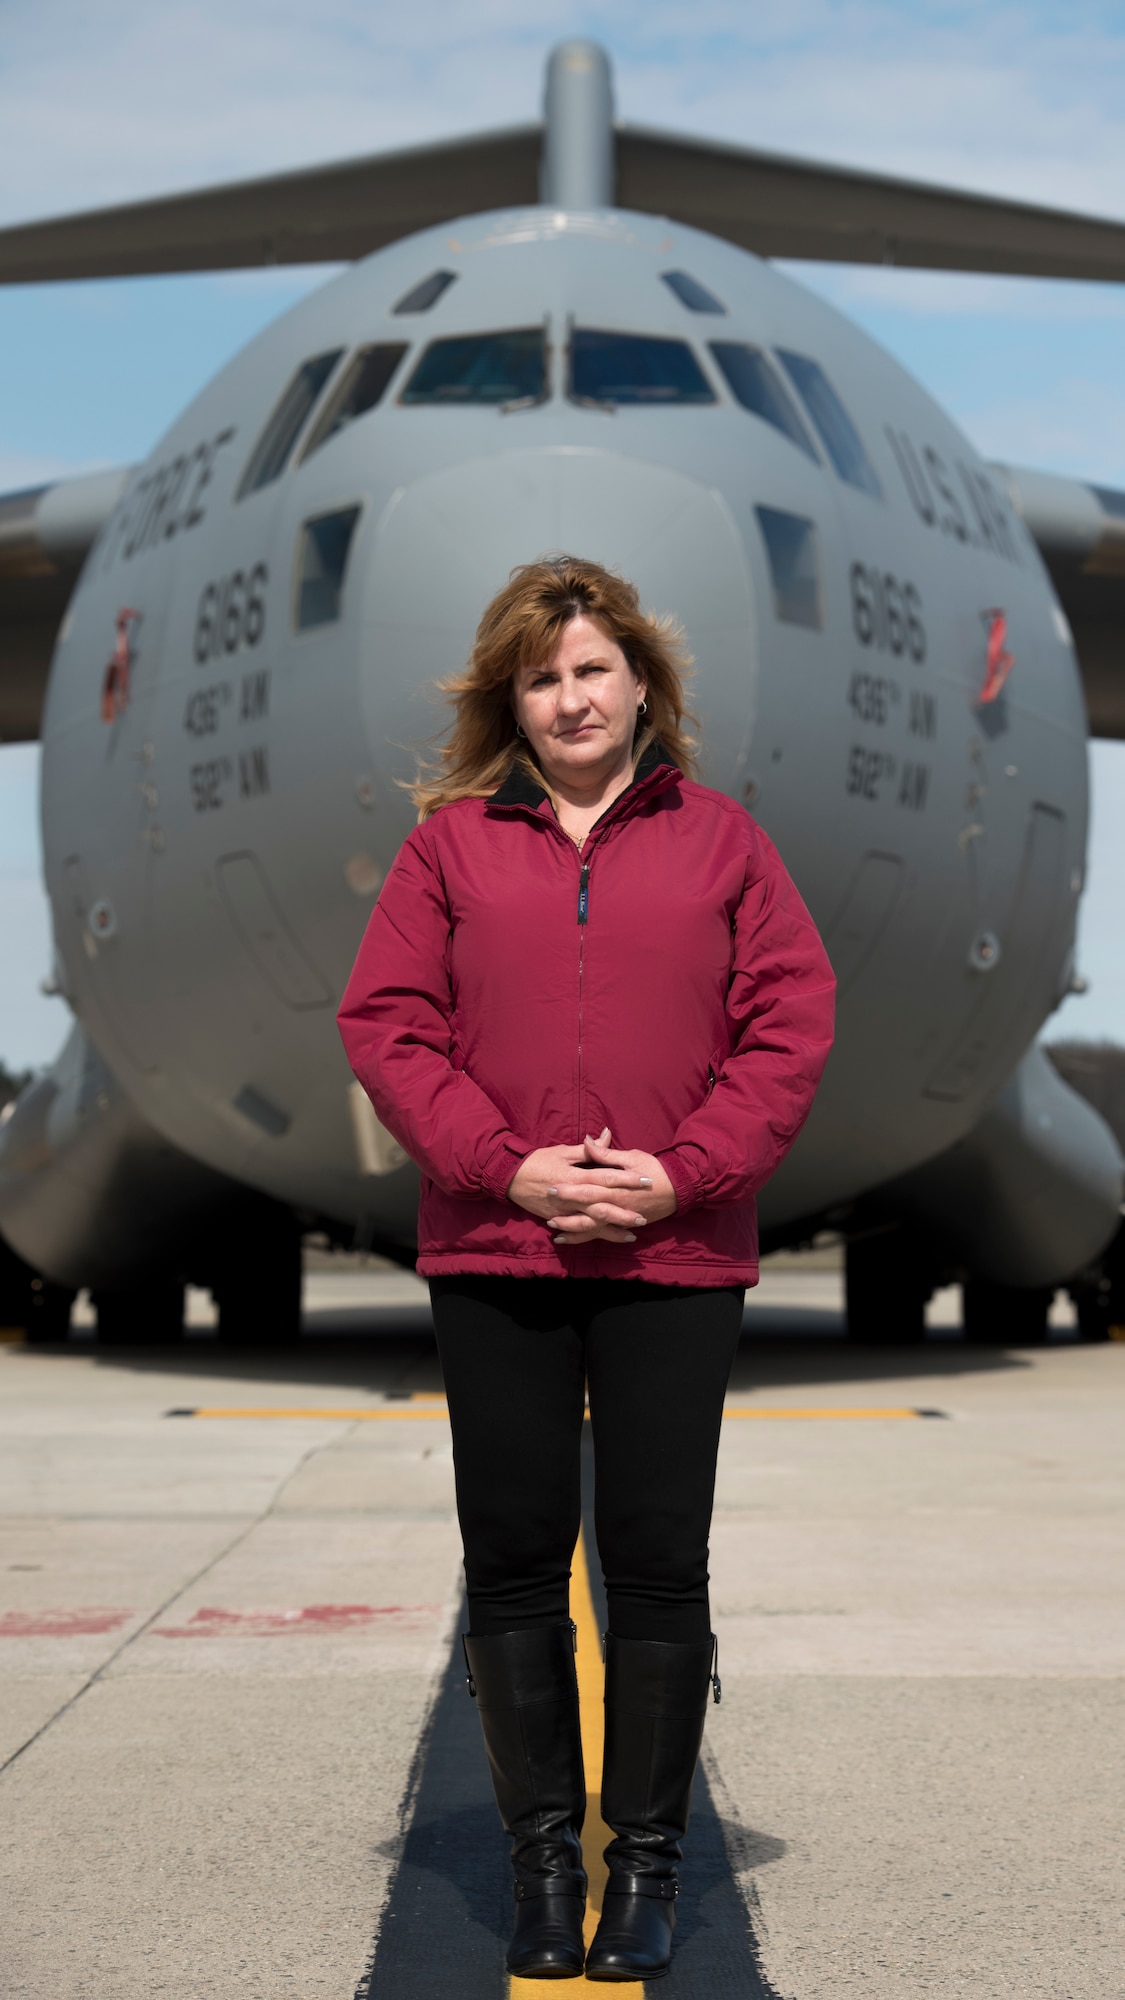 Retired Senior Master Sgt. Kathleen Lambert, a former 512th Airlift Wing loadmaster, stands in front of a C-17 Globemaster III on the flightline at Dover Air Force Base, Del., March 6, 2018. Lambert was one of the initial aircrew members to be fully trained and qualified on C-17s when they first arrived to Dover AFB in 2007. (U.S Air Force photo by Senior Airman Zachary Cacicia)